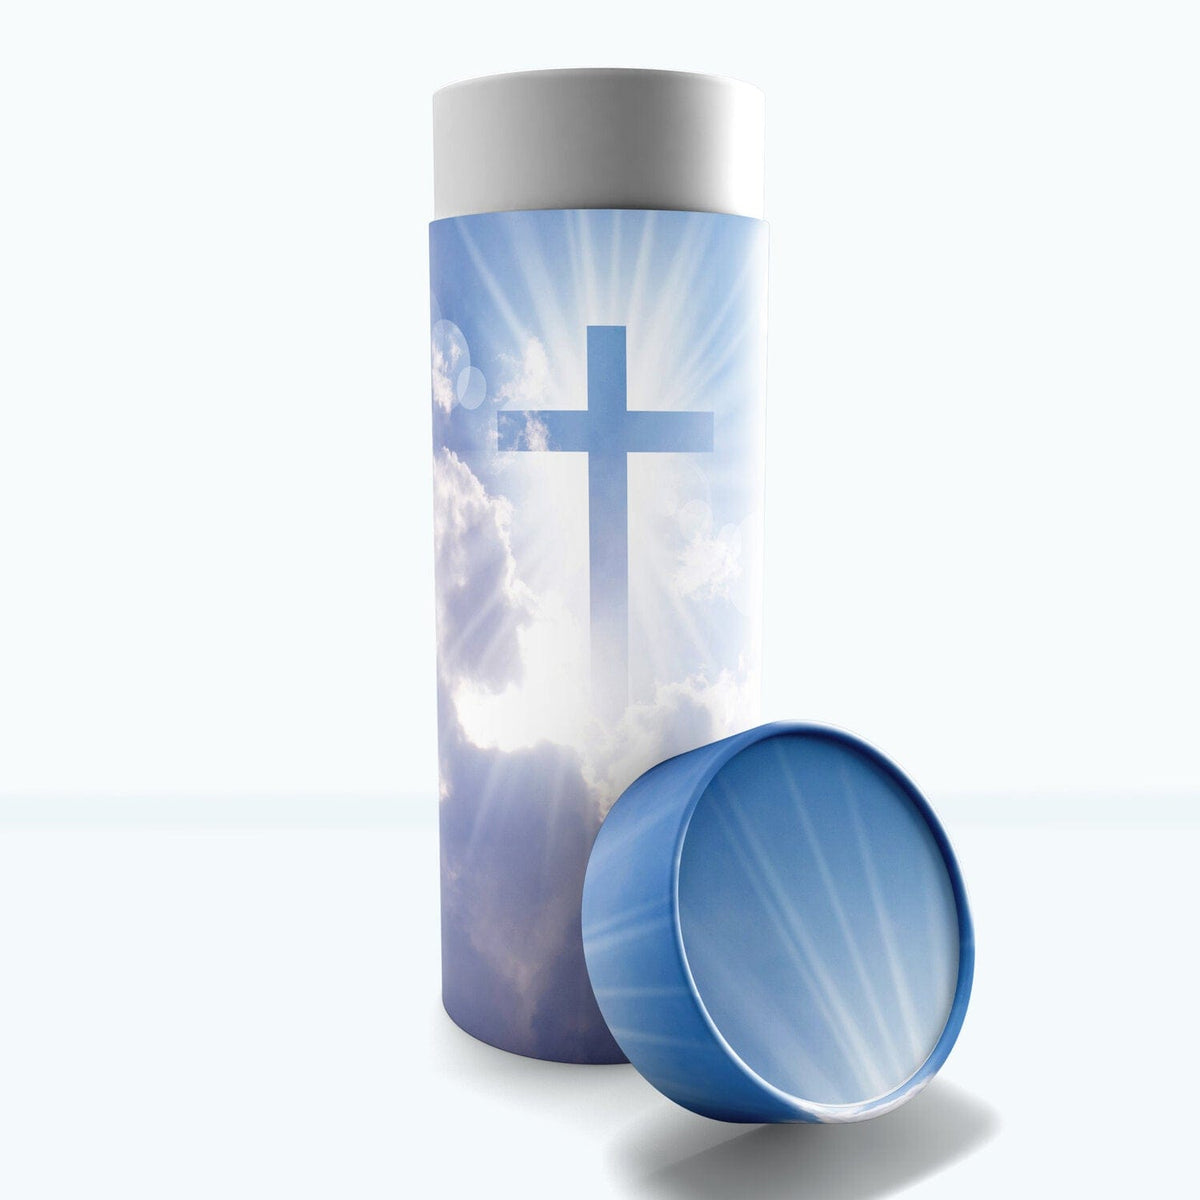 Commemorative Cremation Urns Small Heavenly Cross - Biodegradable &amp; Eco Friendly Burial or Scattering Urn / Tube